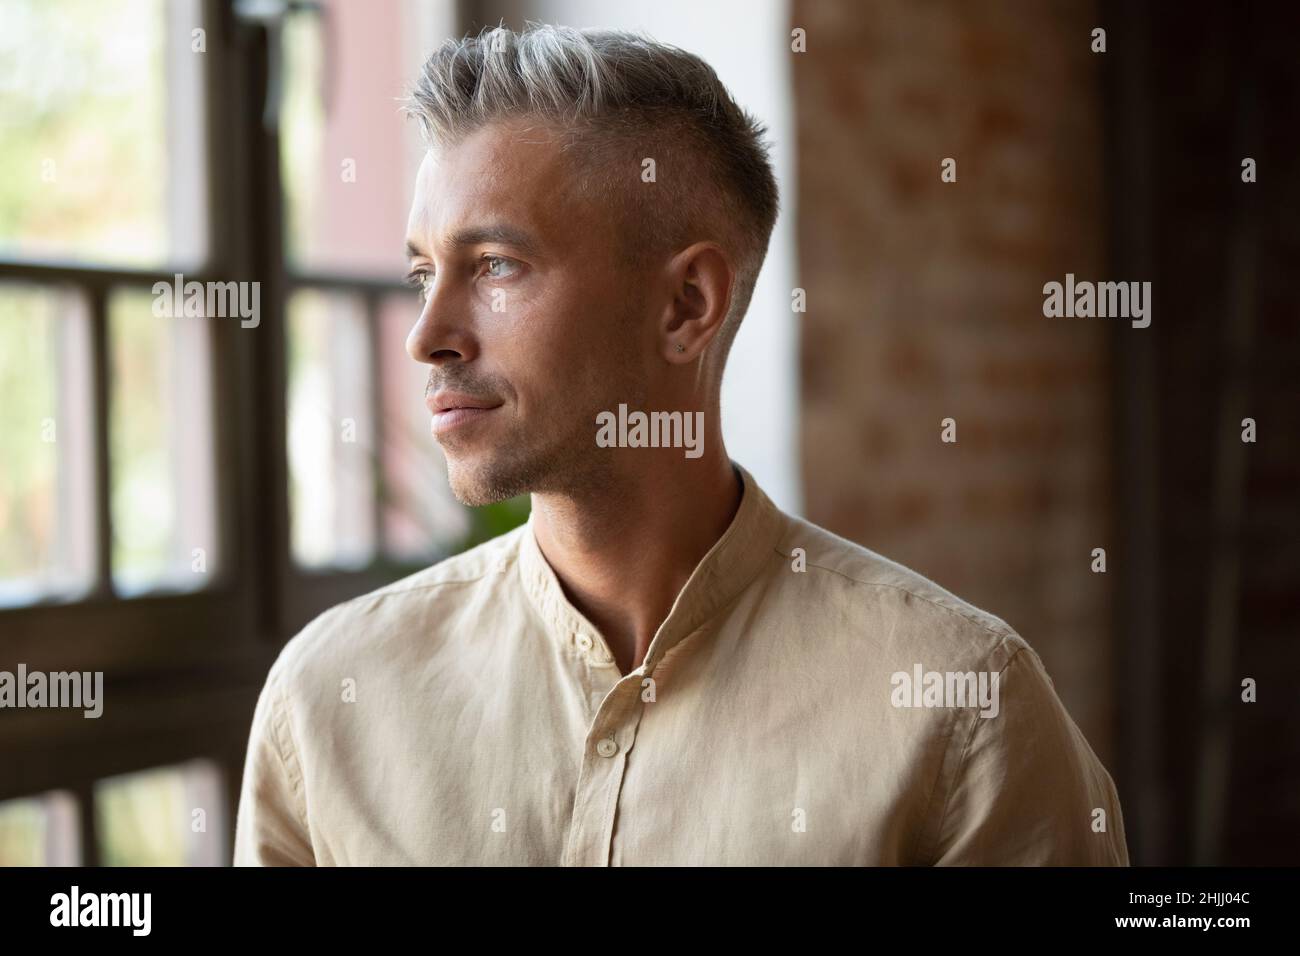 Serious thoughtful handsome millennial grey haired business man head shot Stock Photo